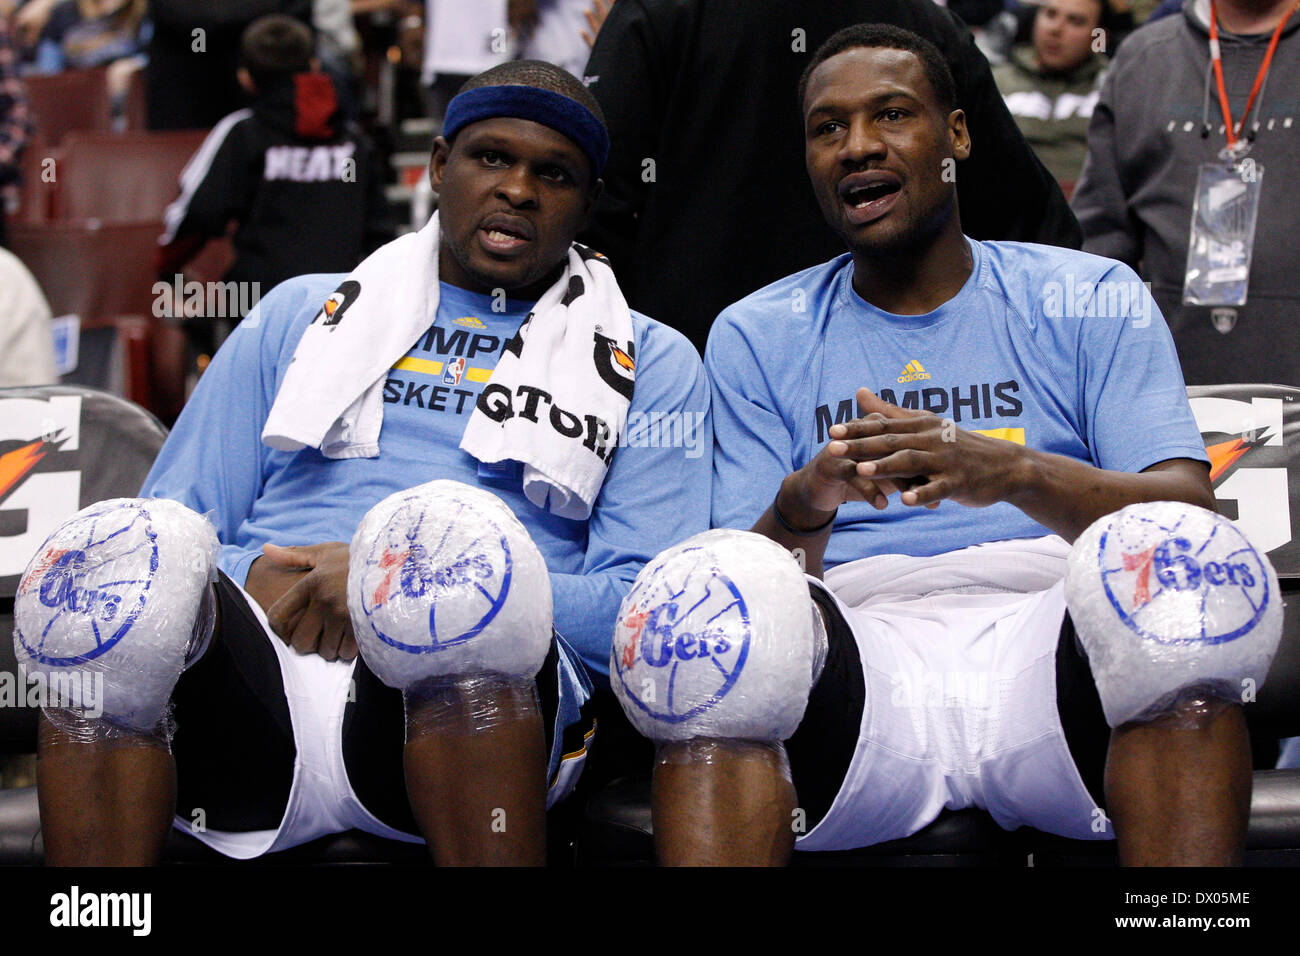 March 15, 2014: Memphis Grizzlies forward Zach Randolph (50) looks on from the bench with guard Tony Allen (9) with 76ers Ice Bags on their knees during the NBA game between the Memphis Grizzlies and the Philadelphia 76ers at the Wells Fargo Center in Philadelphia, Pennsylvania. The Memphis Grizzlies won 103-77. Christopher Szagola/Cal Sport Media Stock Photo